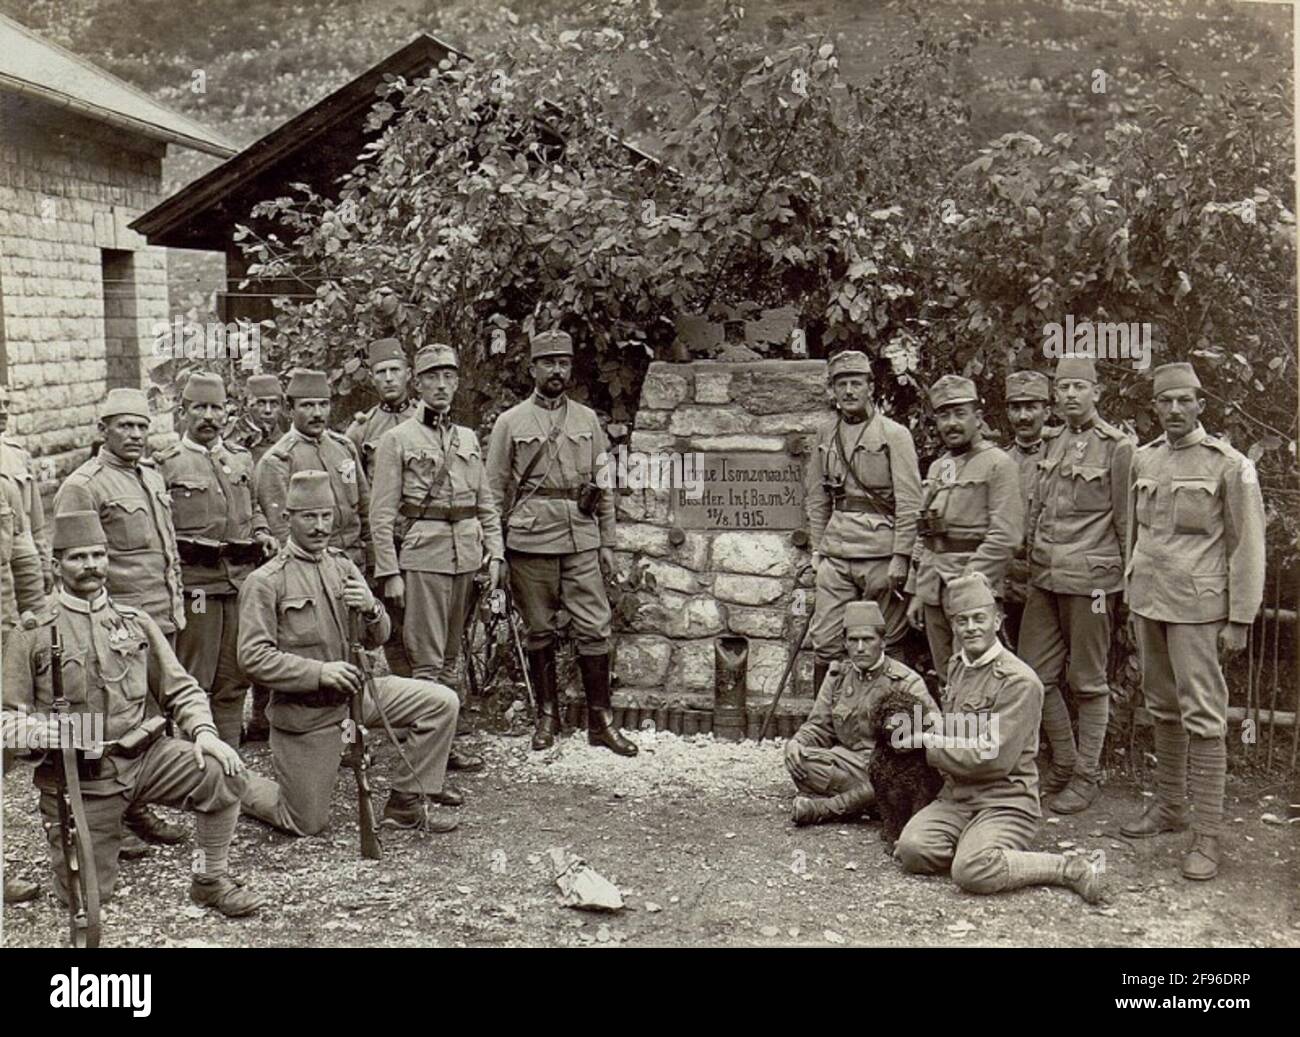 Bosnian Herczegovine infantry soldiers of the 1st mountain brigade of the 18th Infantry Division The first mountain brigade had to survive serious fighting during the third ISONZOOD in October 1915. The recording was made in the area Salcano Zagora, the setup room of the mountain brigade Stock Photo